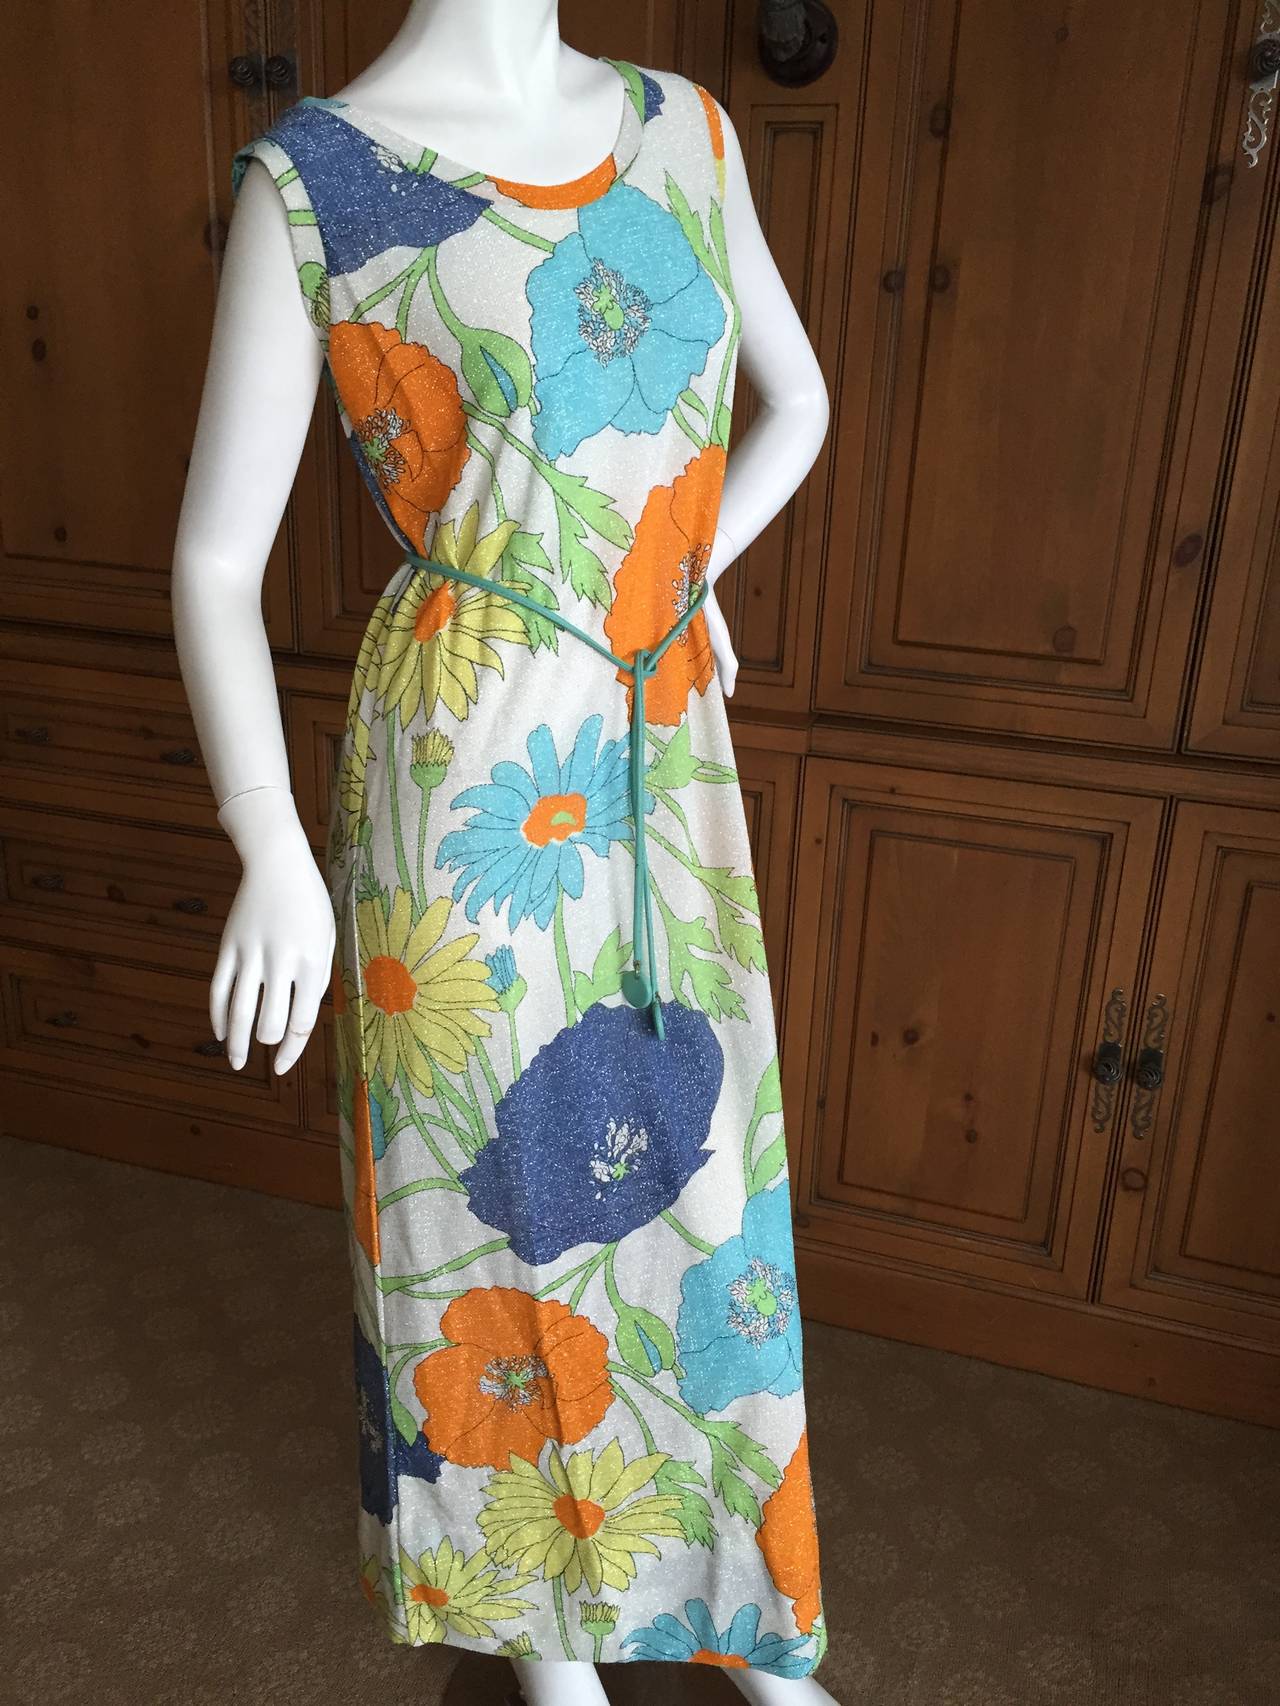 The Lilly by Lilly Pulitzer Sleeveless Floral Dress & Jacket For Sale 1